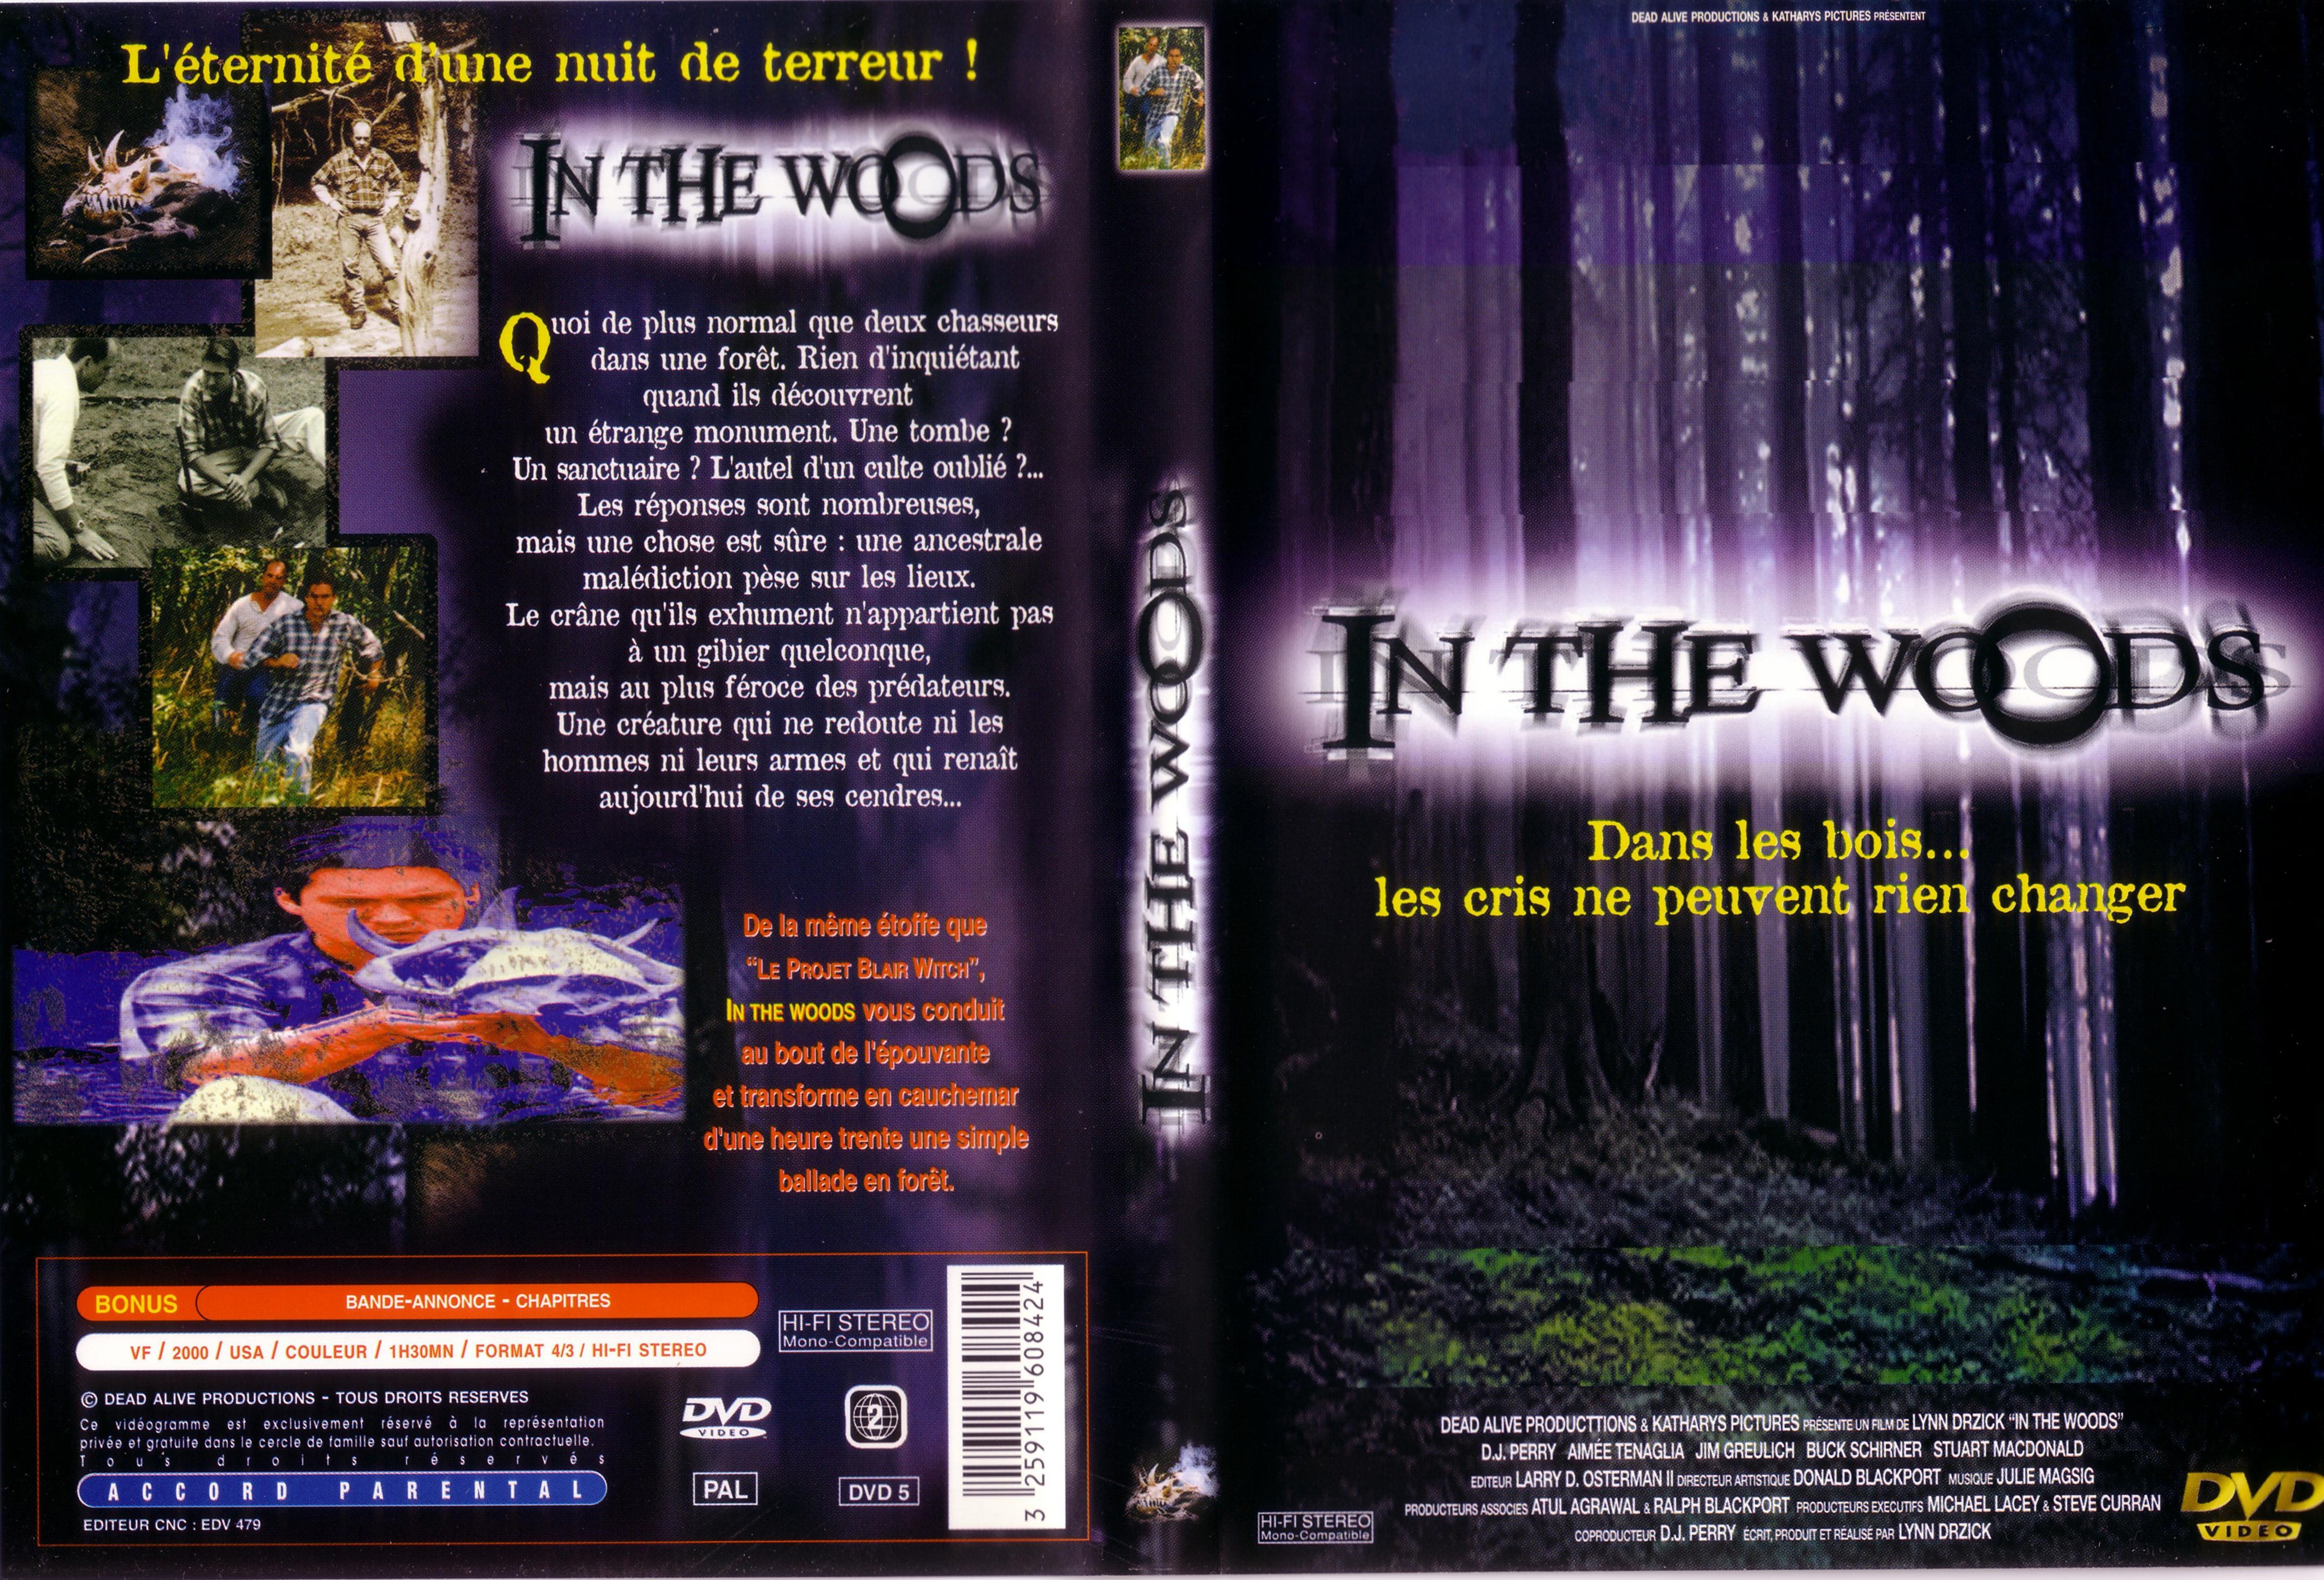 Jaquette DVD In the woods